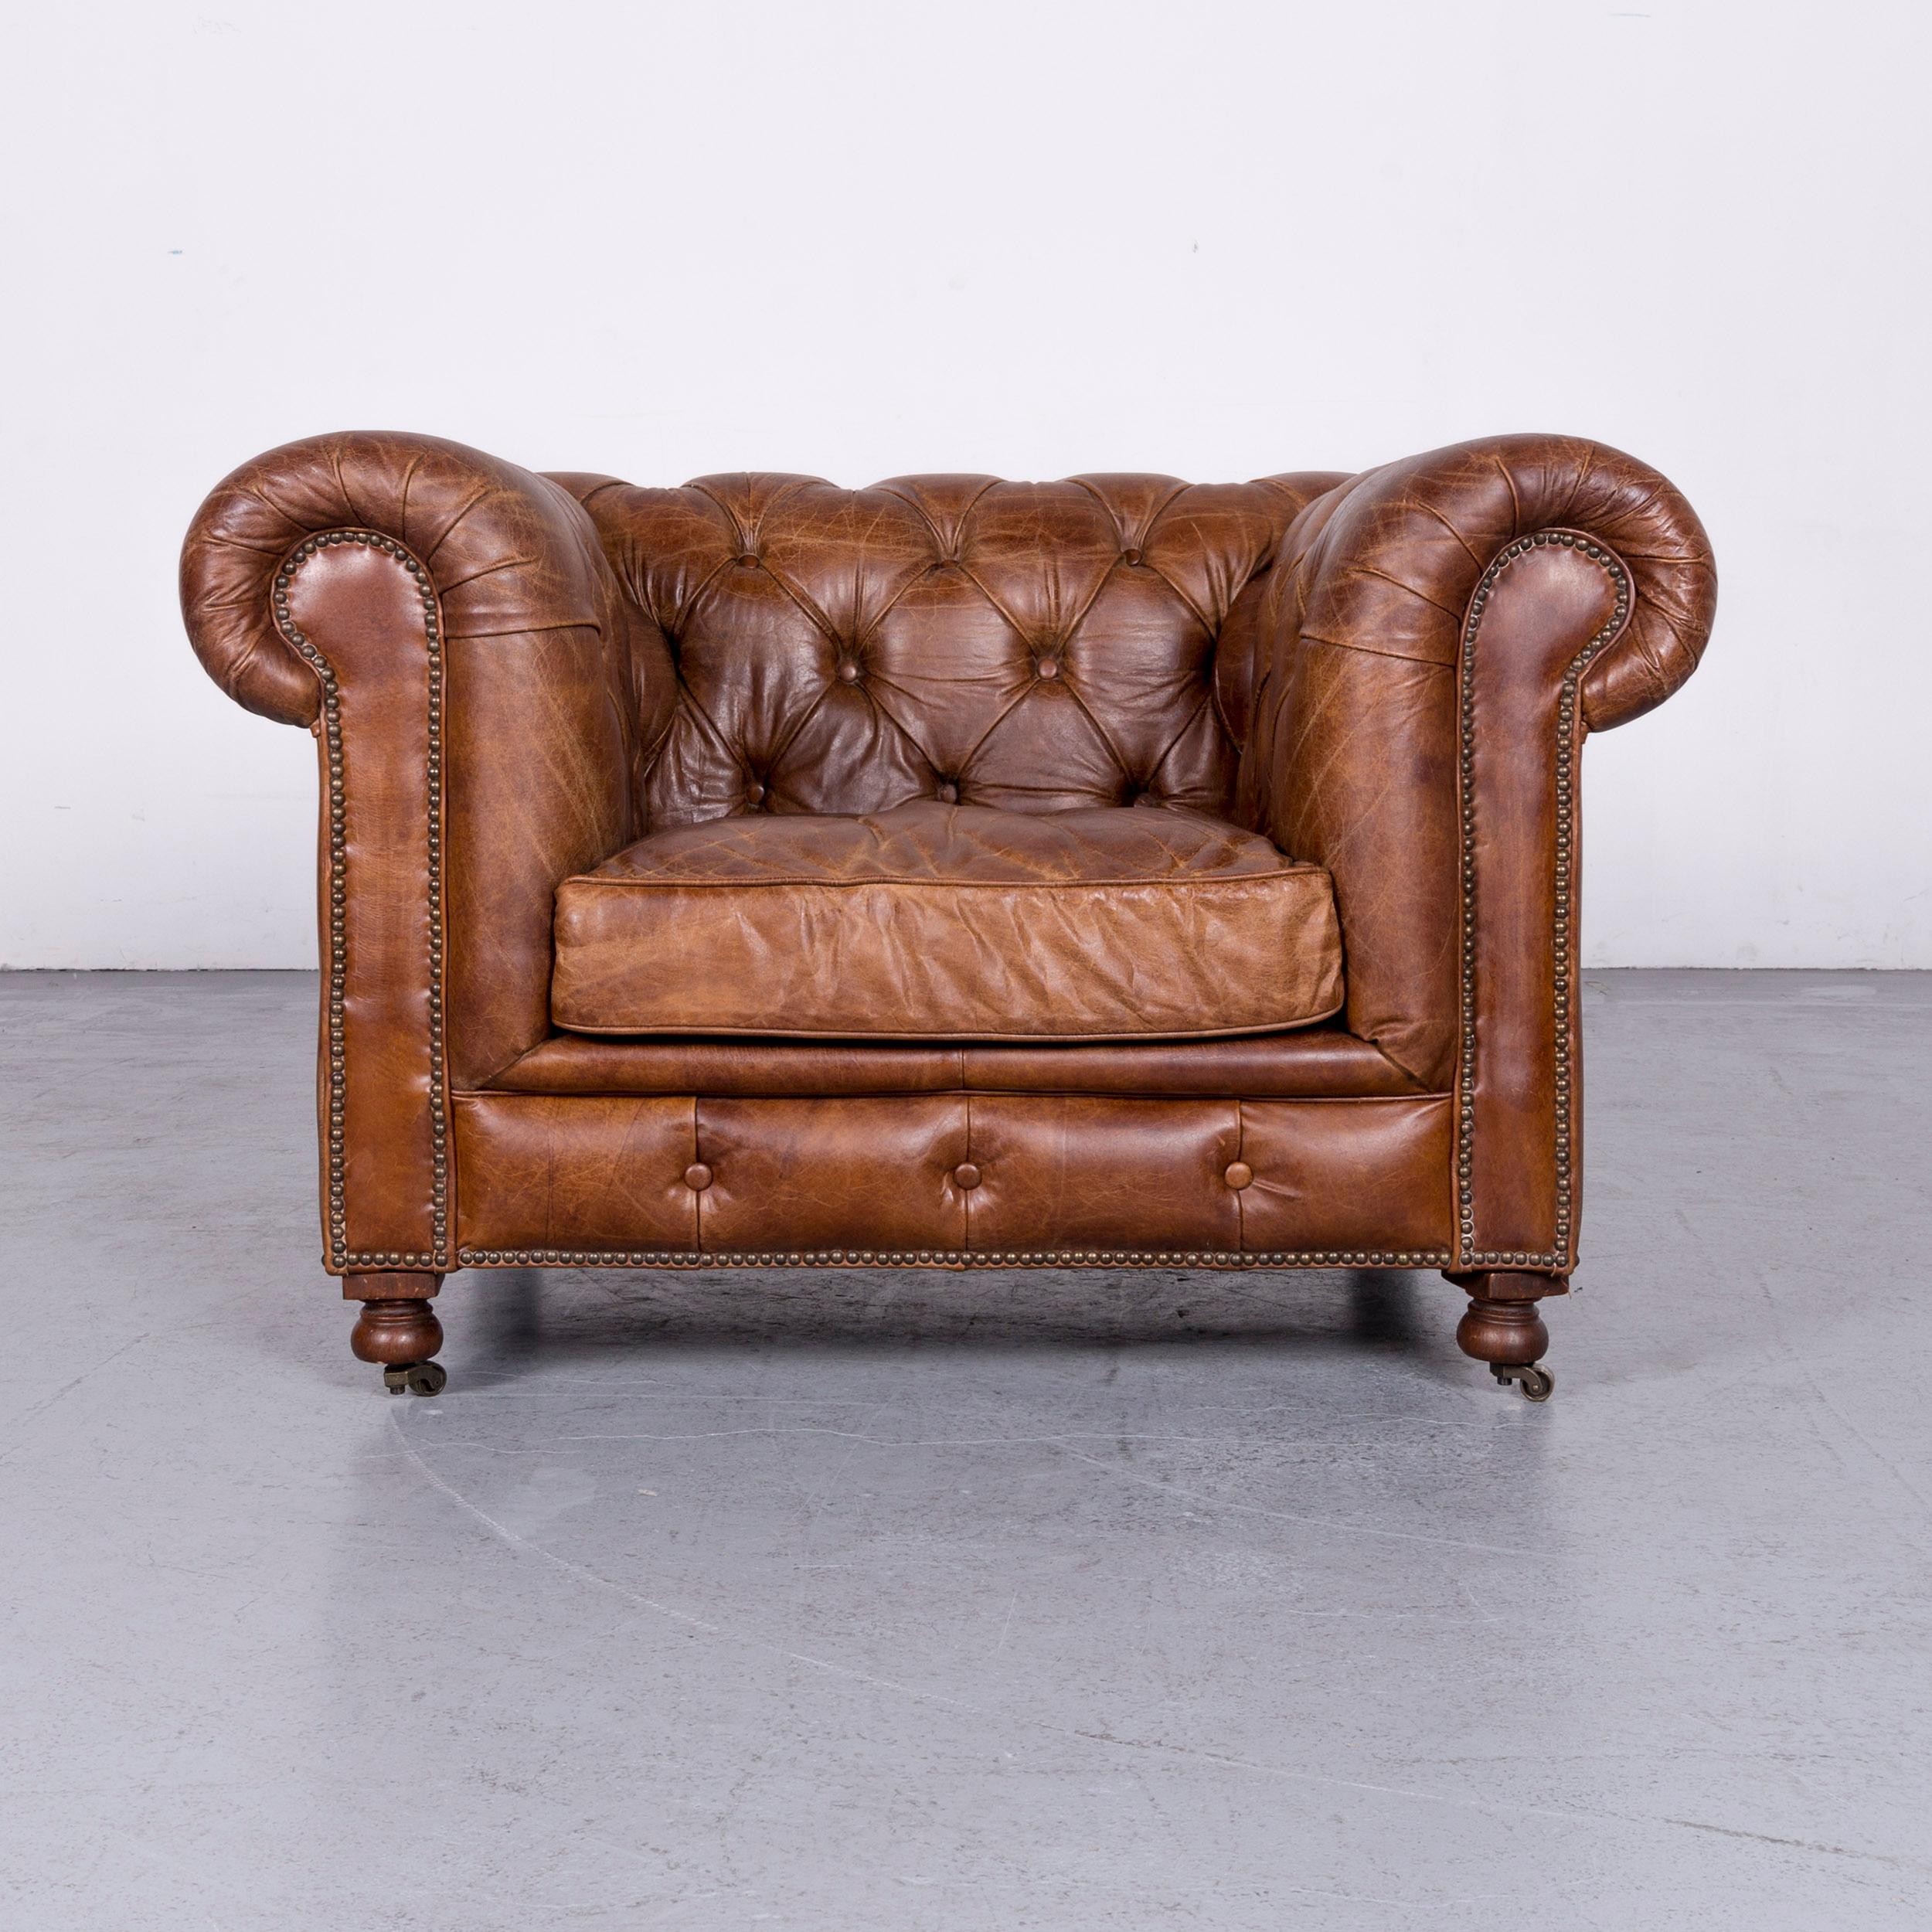 We bring to you a vintage brown Chesterfield leather armchair buttoned clubchair in brown.